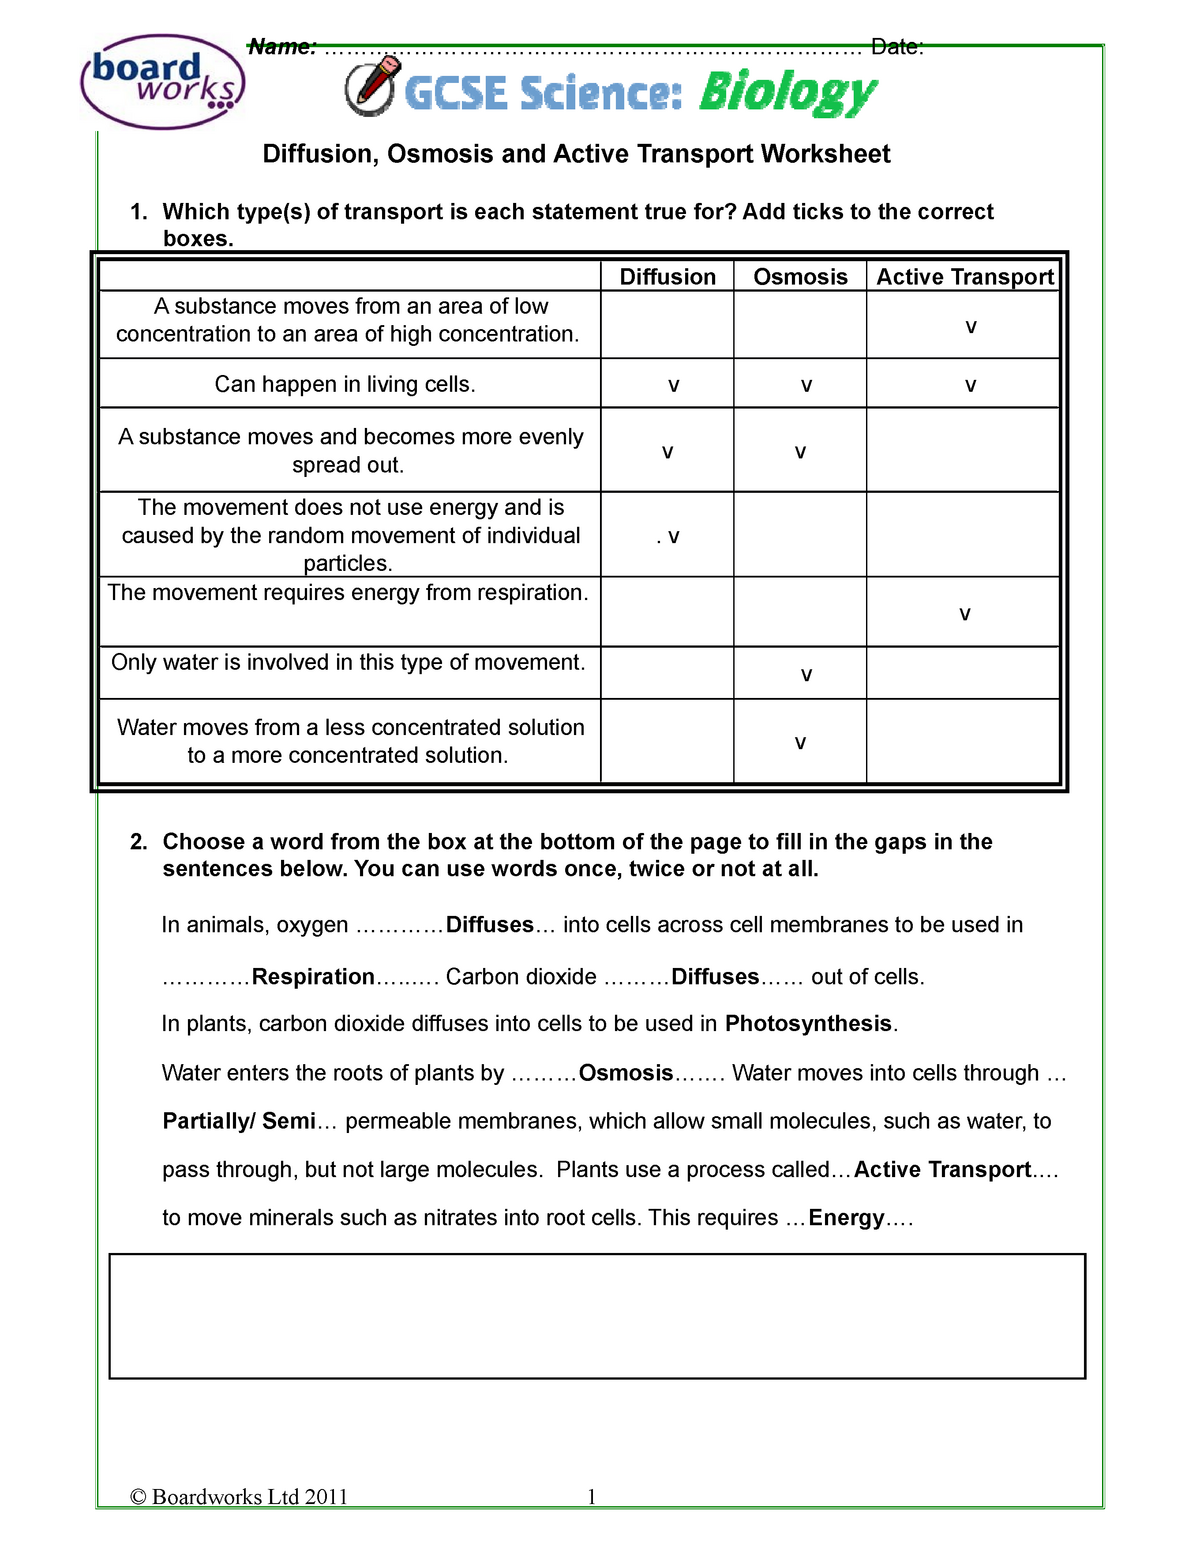 Diffusion Osmosis and Active Transport Worksheet F20 - Name With Diffusion And Osmosis Worksheet